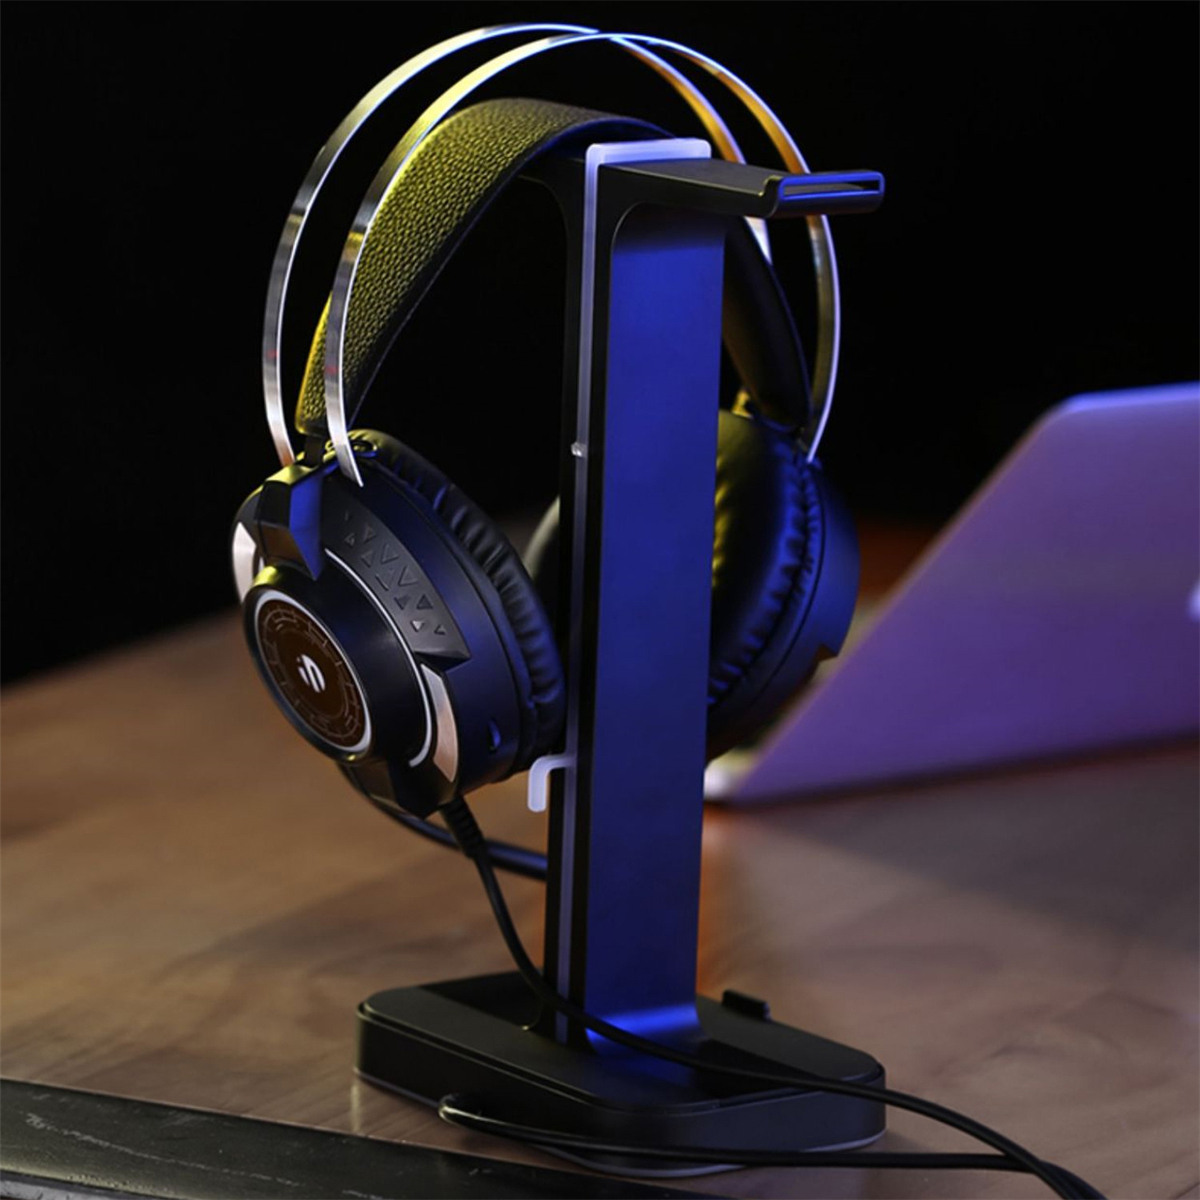 Inphic-H100-Headset-Stand-Dual-USB-Ports-Colorful-Light-Base-Headphone-Hanger-Headset-Mount-Holder-O-1742022-10